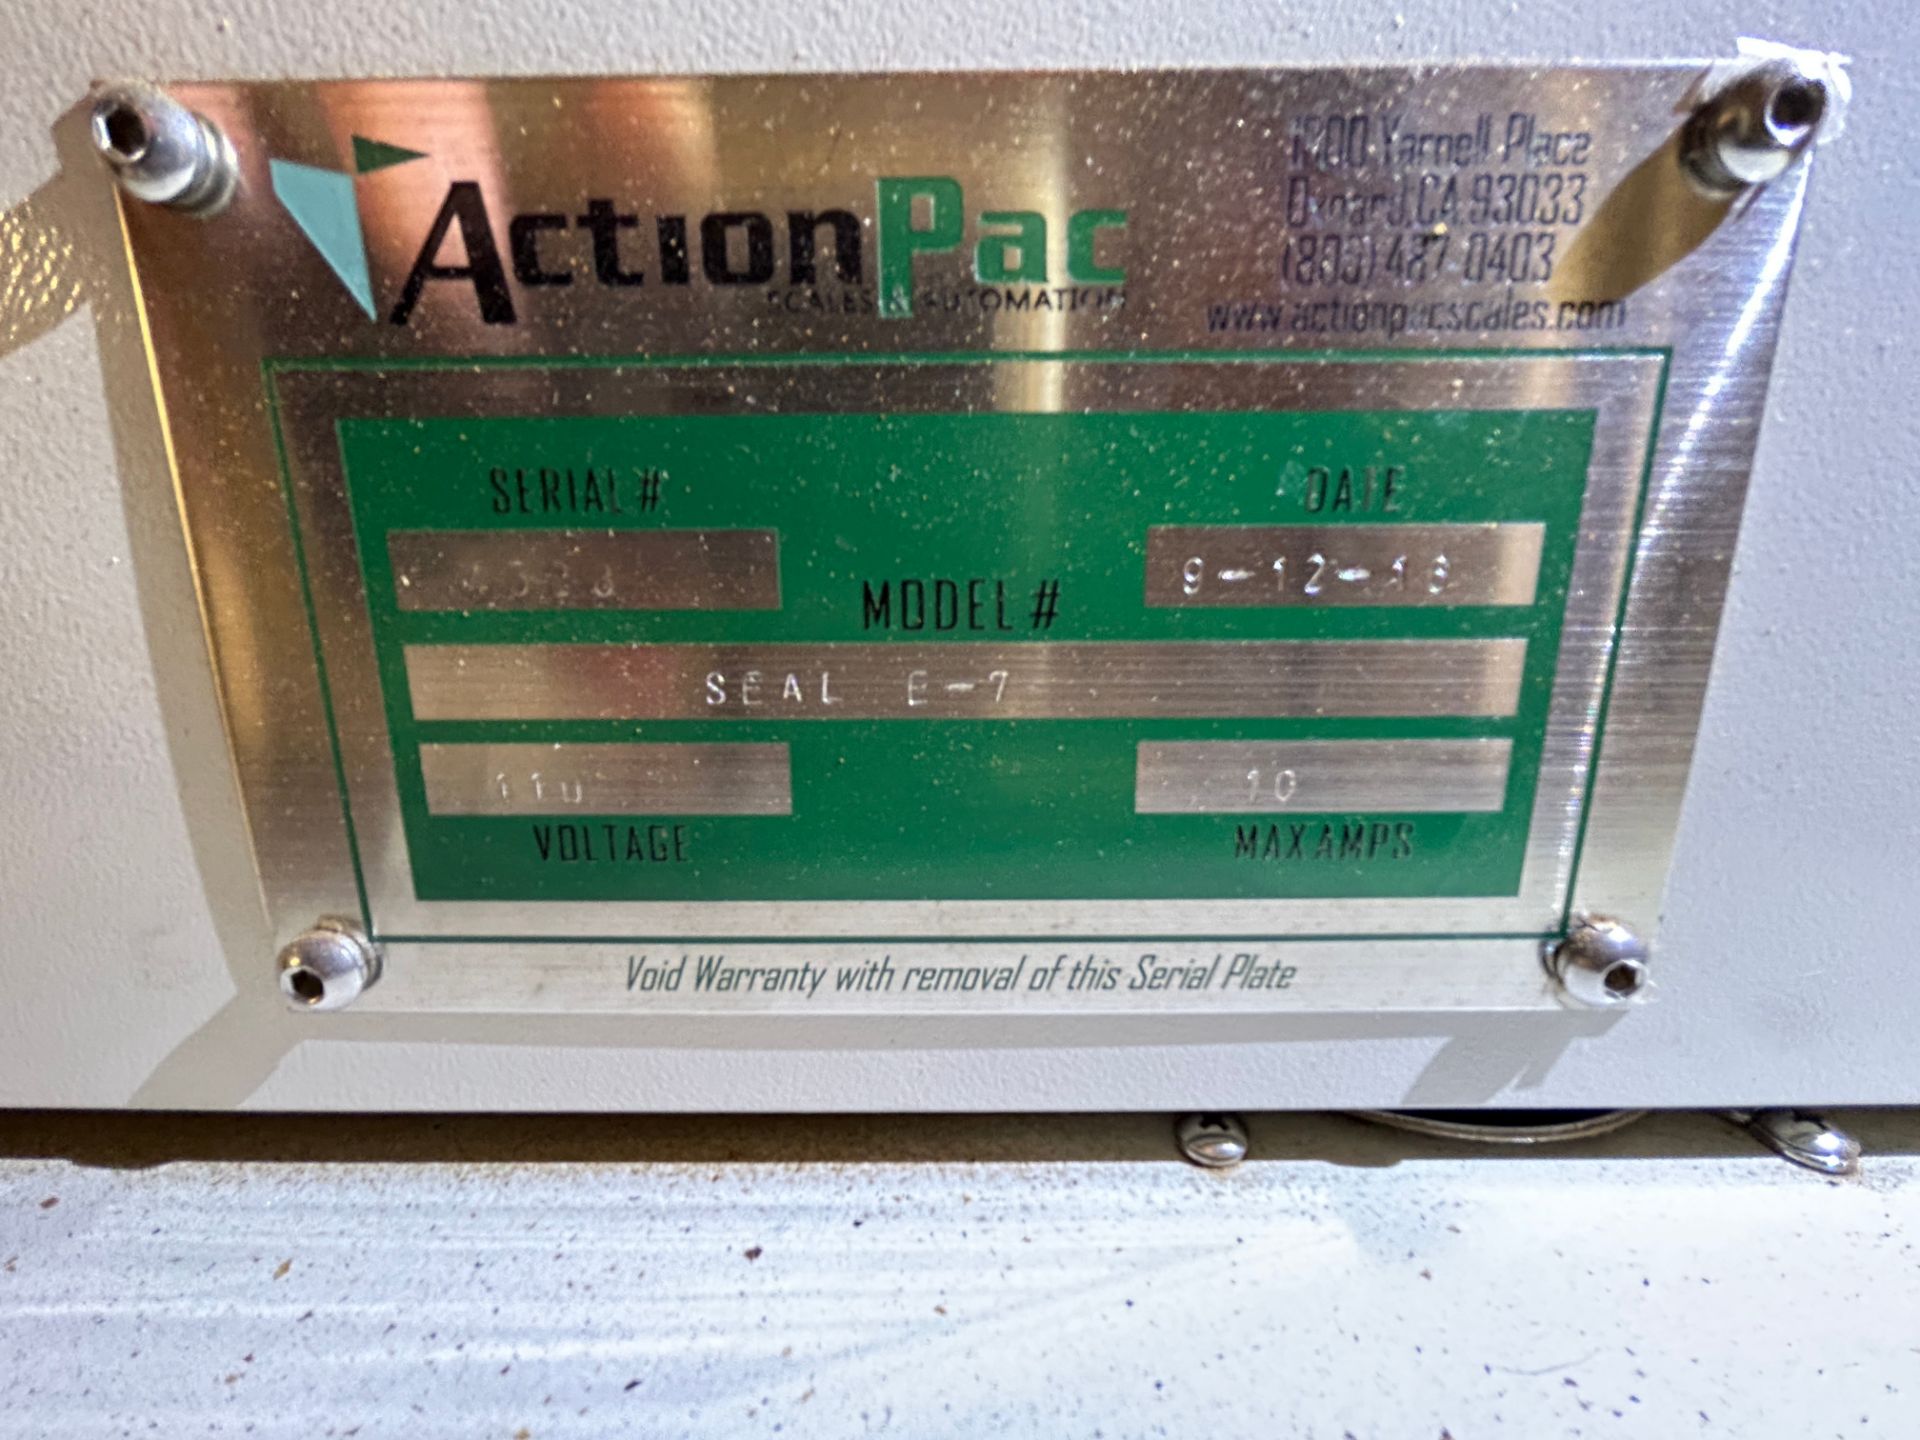 Action Pac Mdl SEAL-E-7, Continuous Inline Band Sealer, 16 Inch Long Seal Section, 9 Inch Wide x - Image 4 of 5